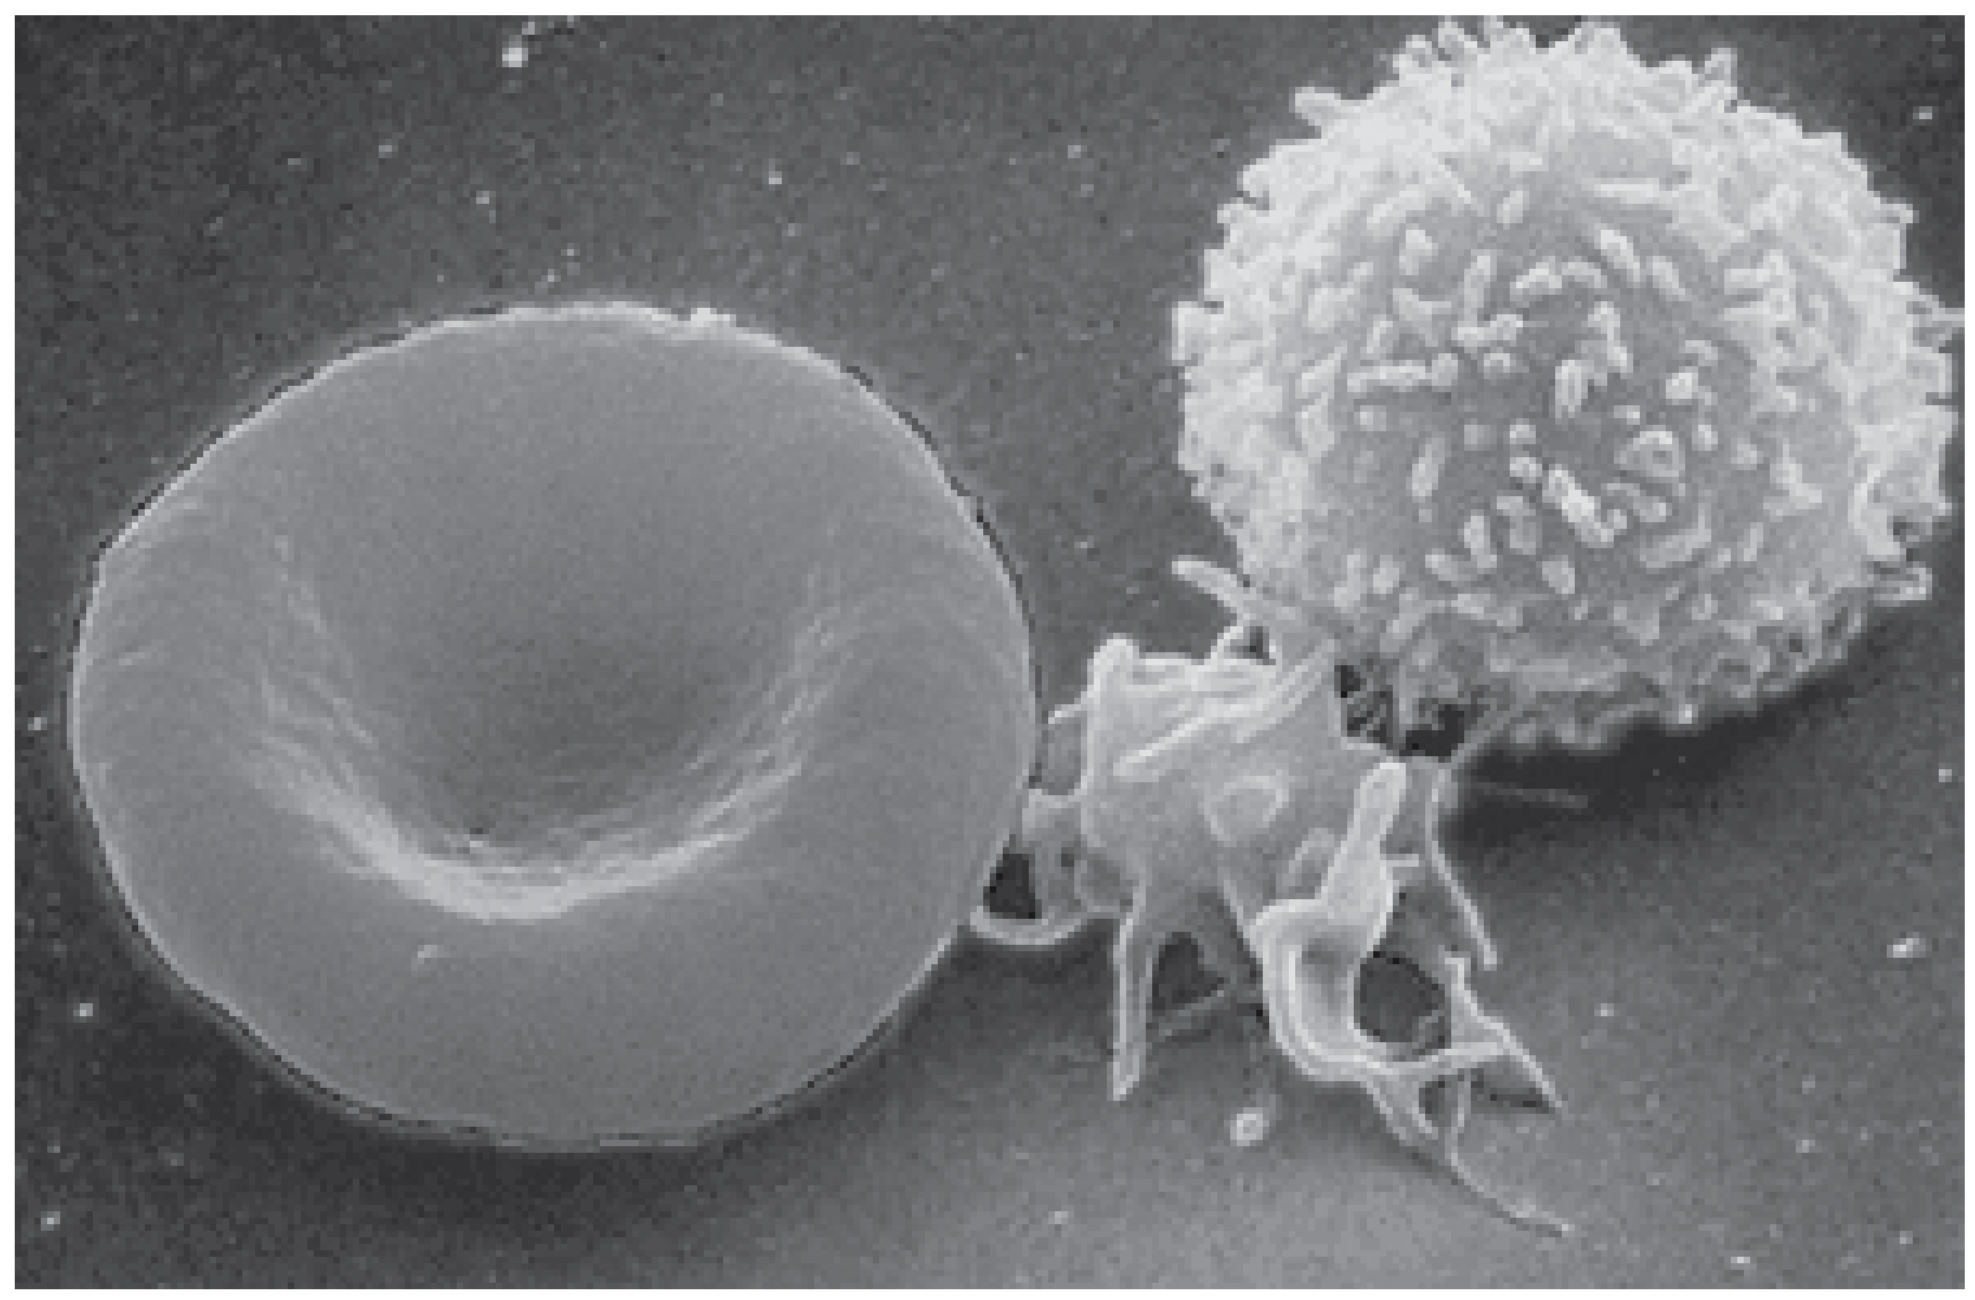 Figure 18.1:Blood Cells A single drop of blood contains millions of red blood cells, white blood cells, and platelets. One of each type is shown here, isolated from a scanning electron micrograph.